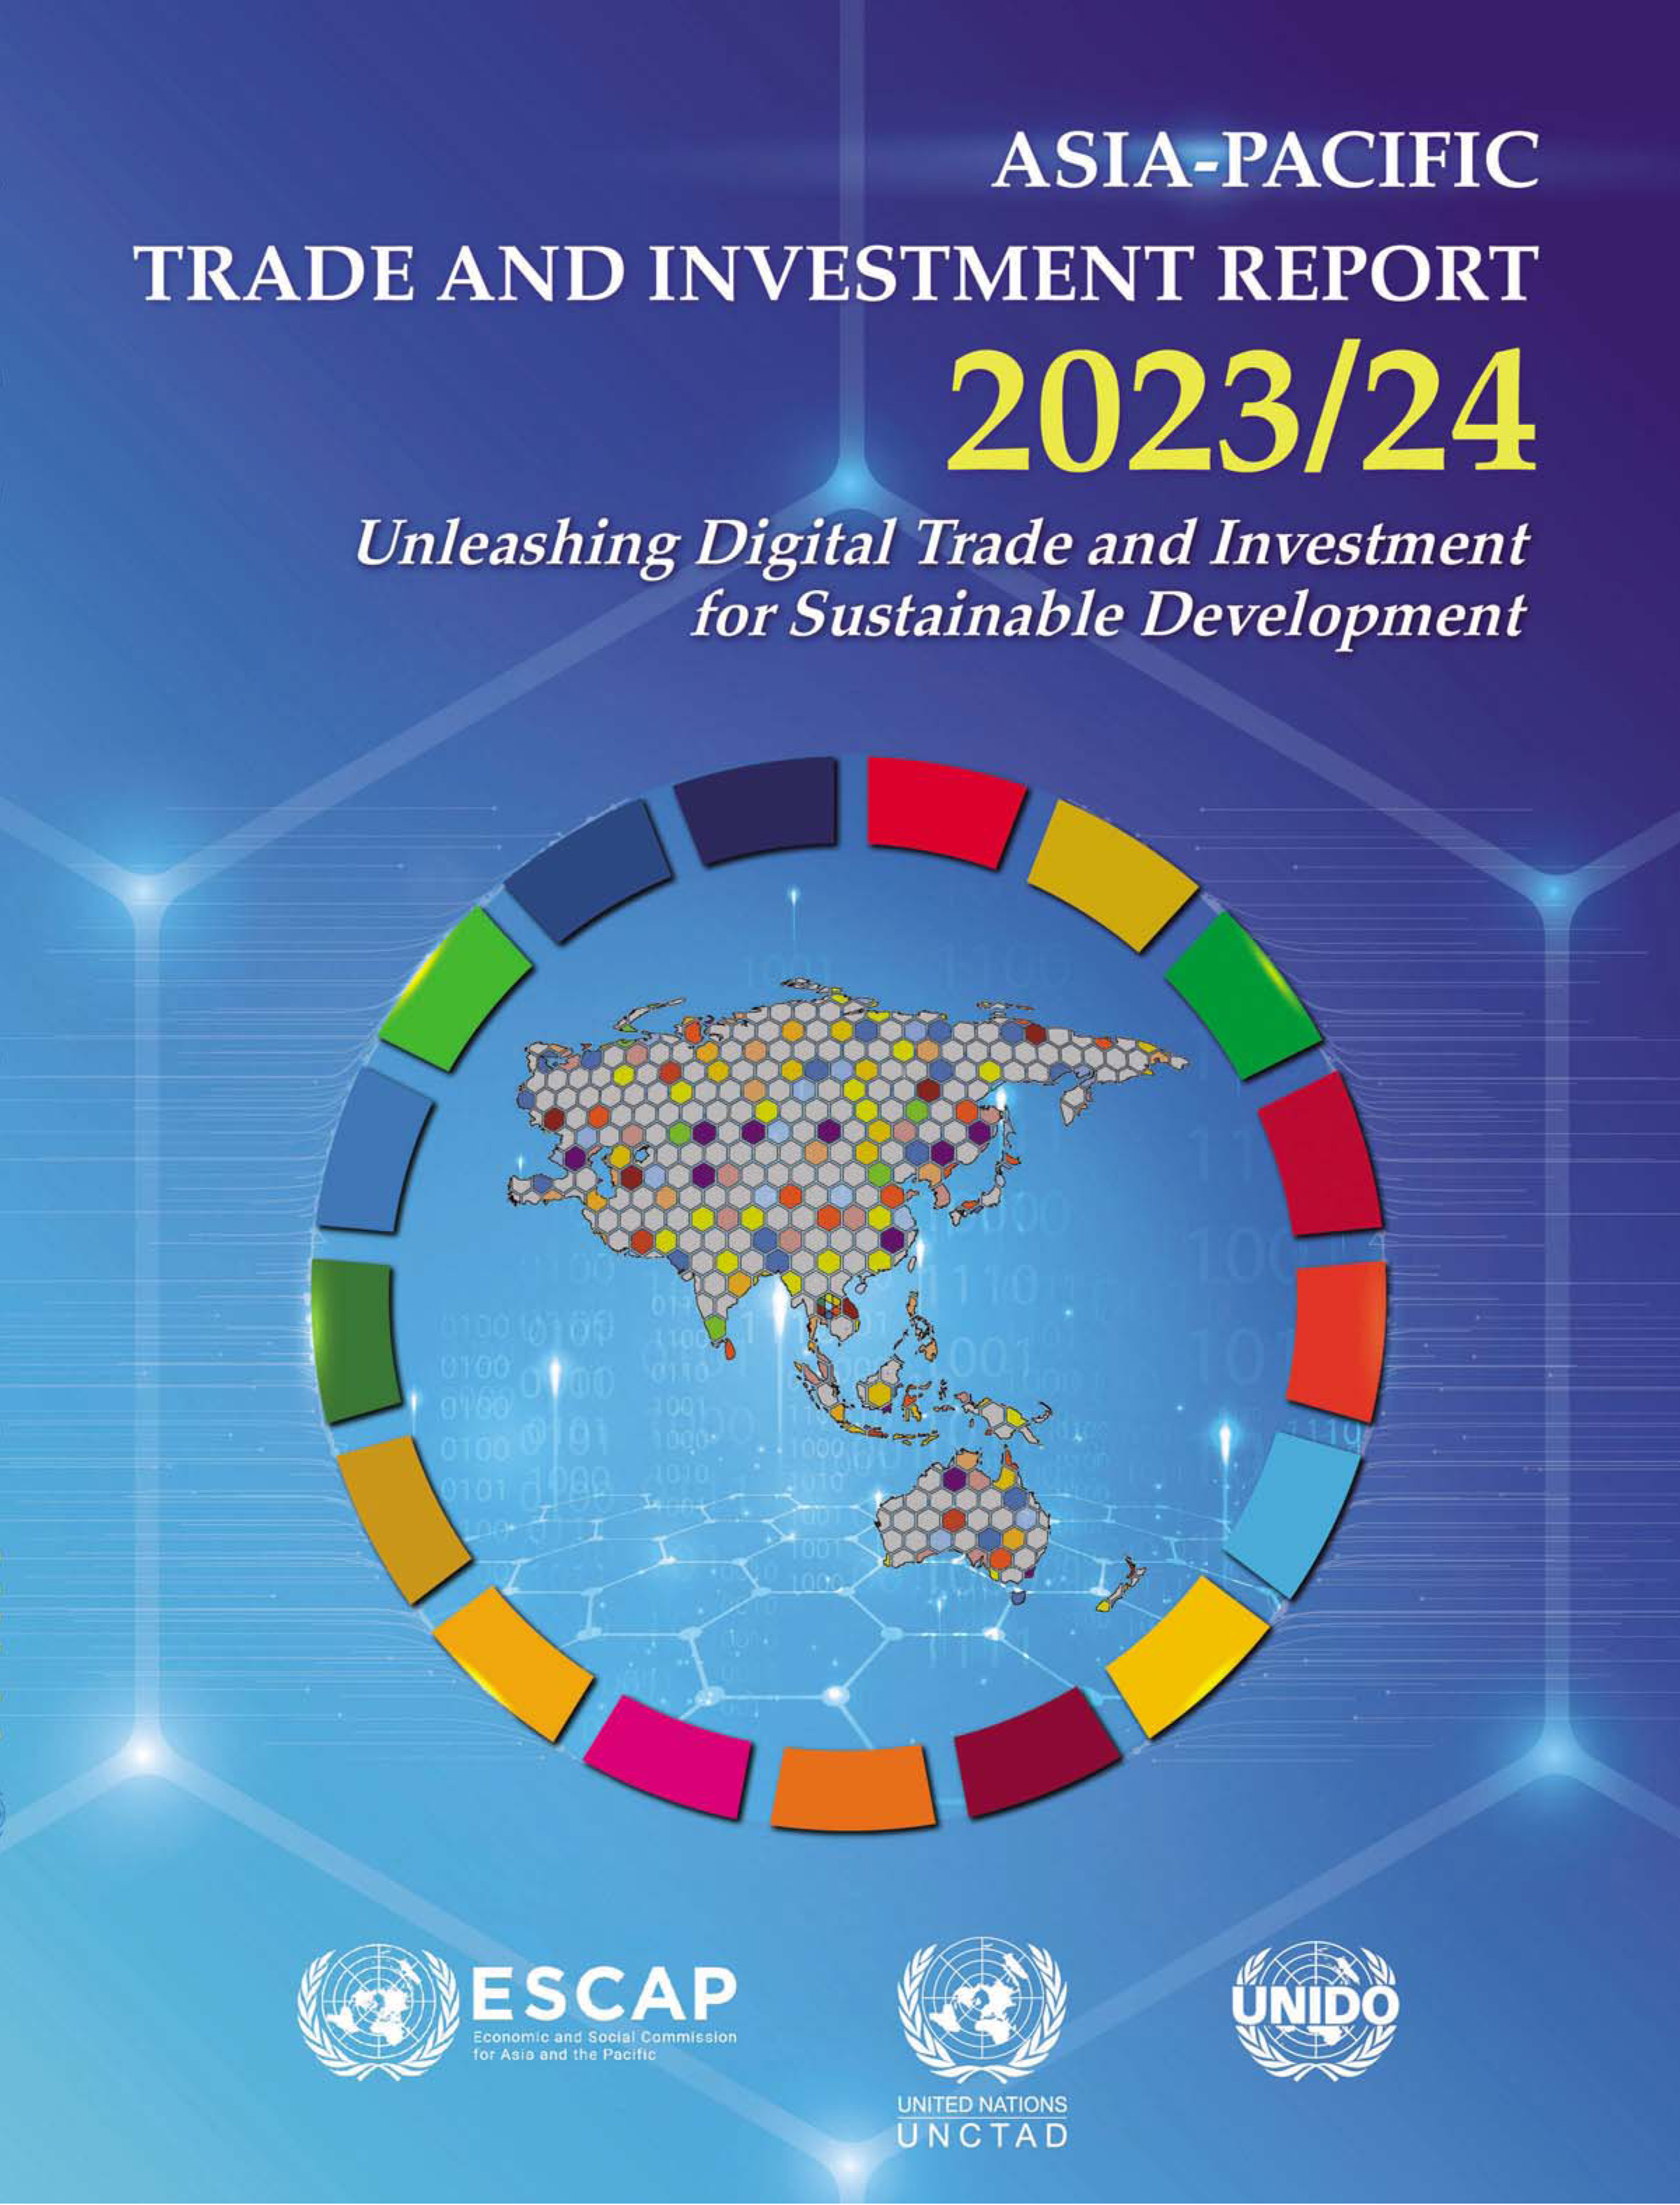 image of Asia-Pacific Trade and Investment Report 2023/24